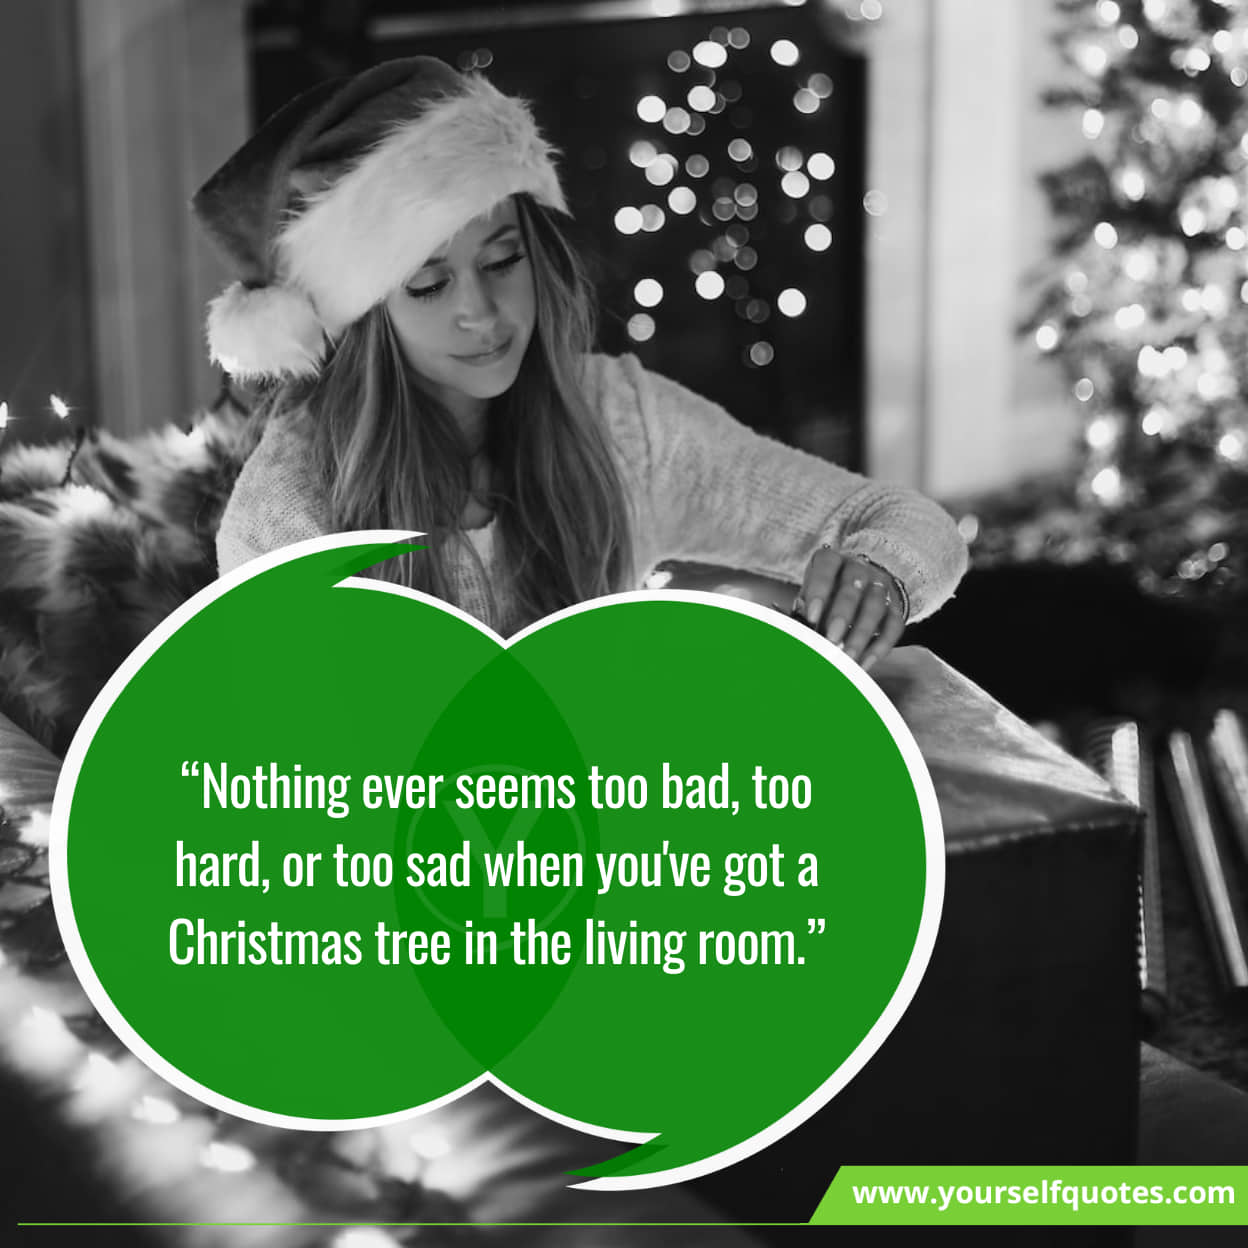 Clever Christmas captions for your photos